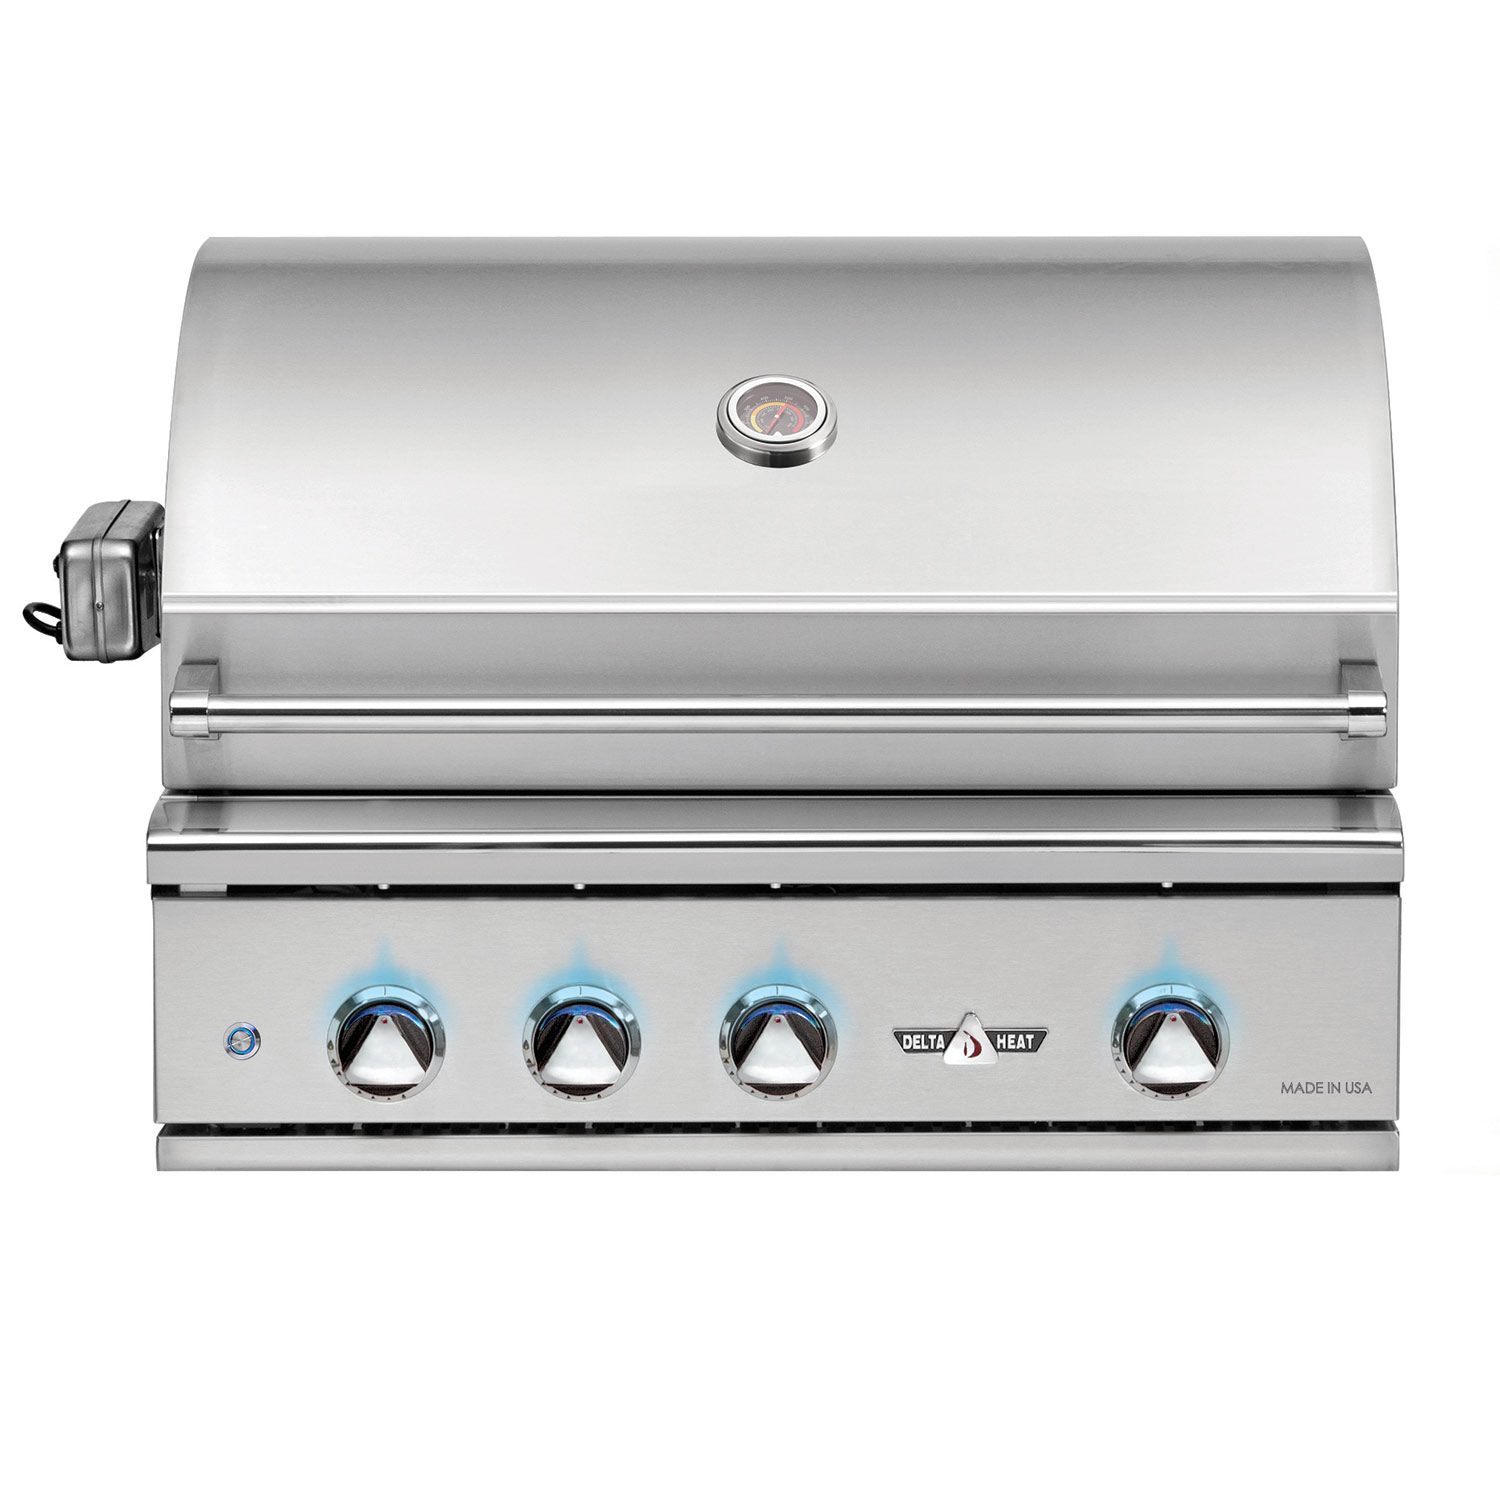 Delta Heat DHBQ32-D Built-In Gas Grill, 32-Inches